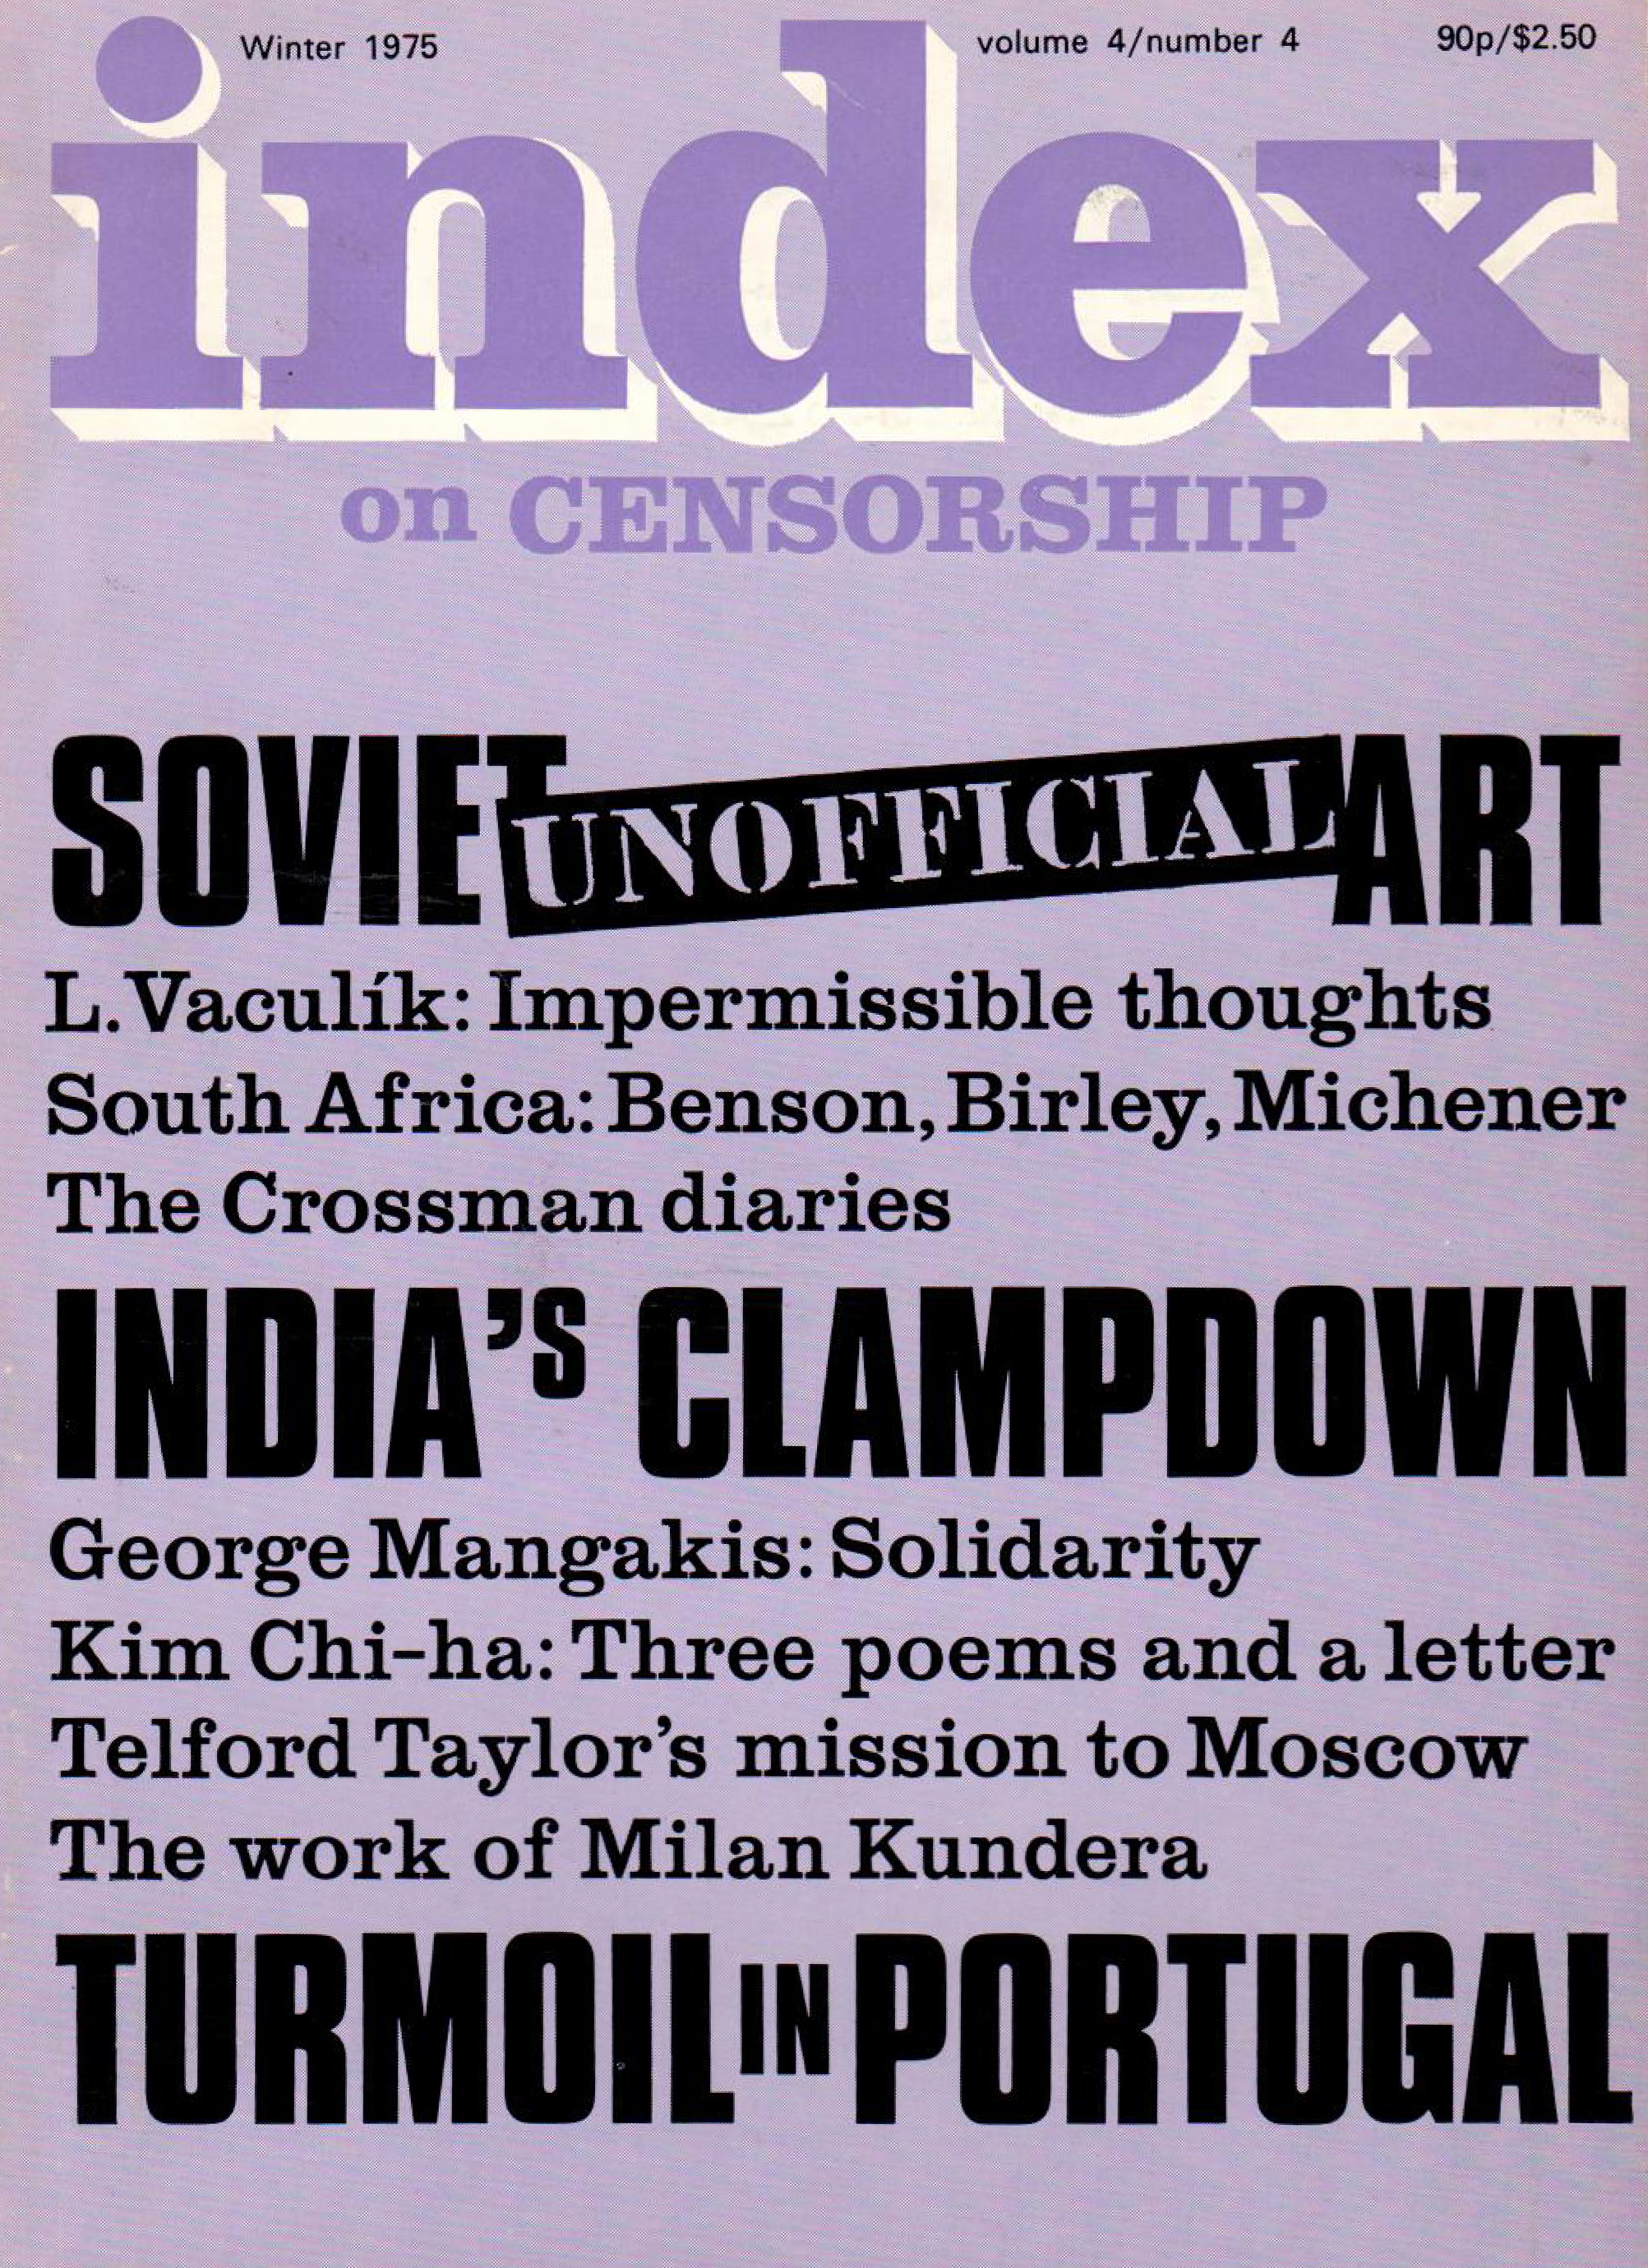 Soviet "unofficial" art, the Winter 1975 issue of Index on Censorship magazine